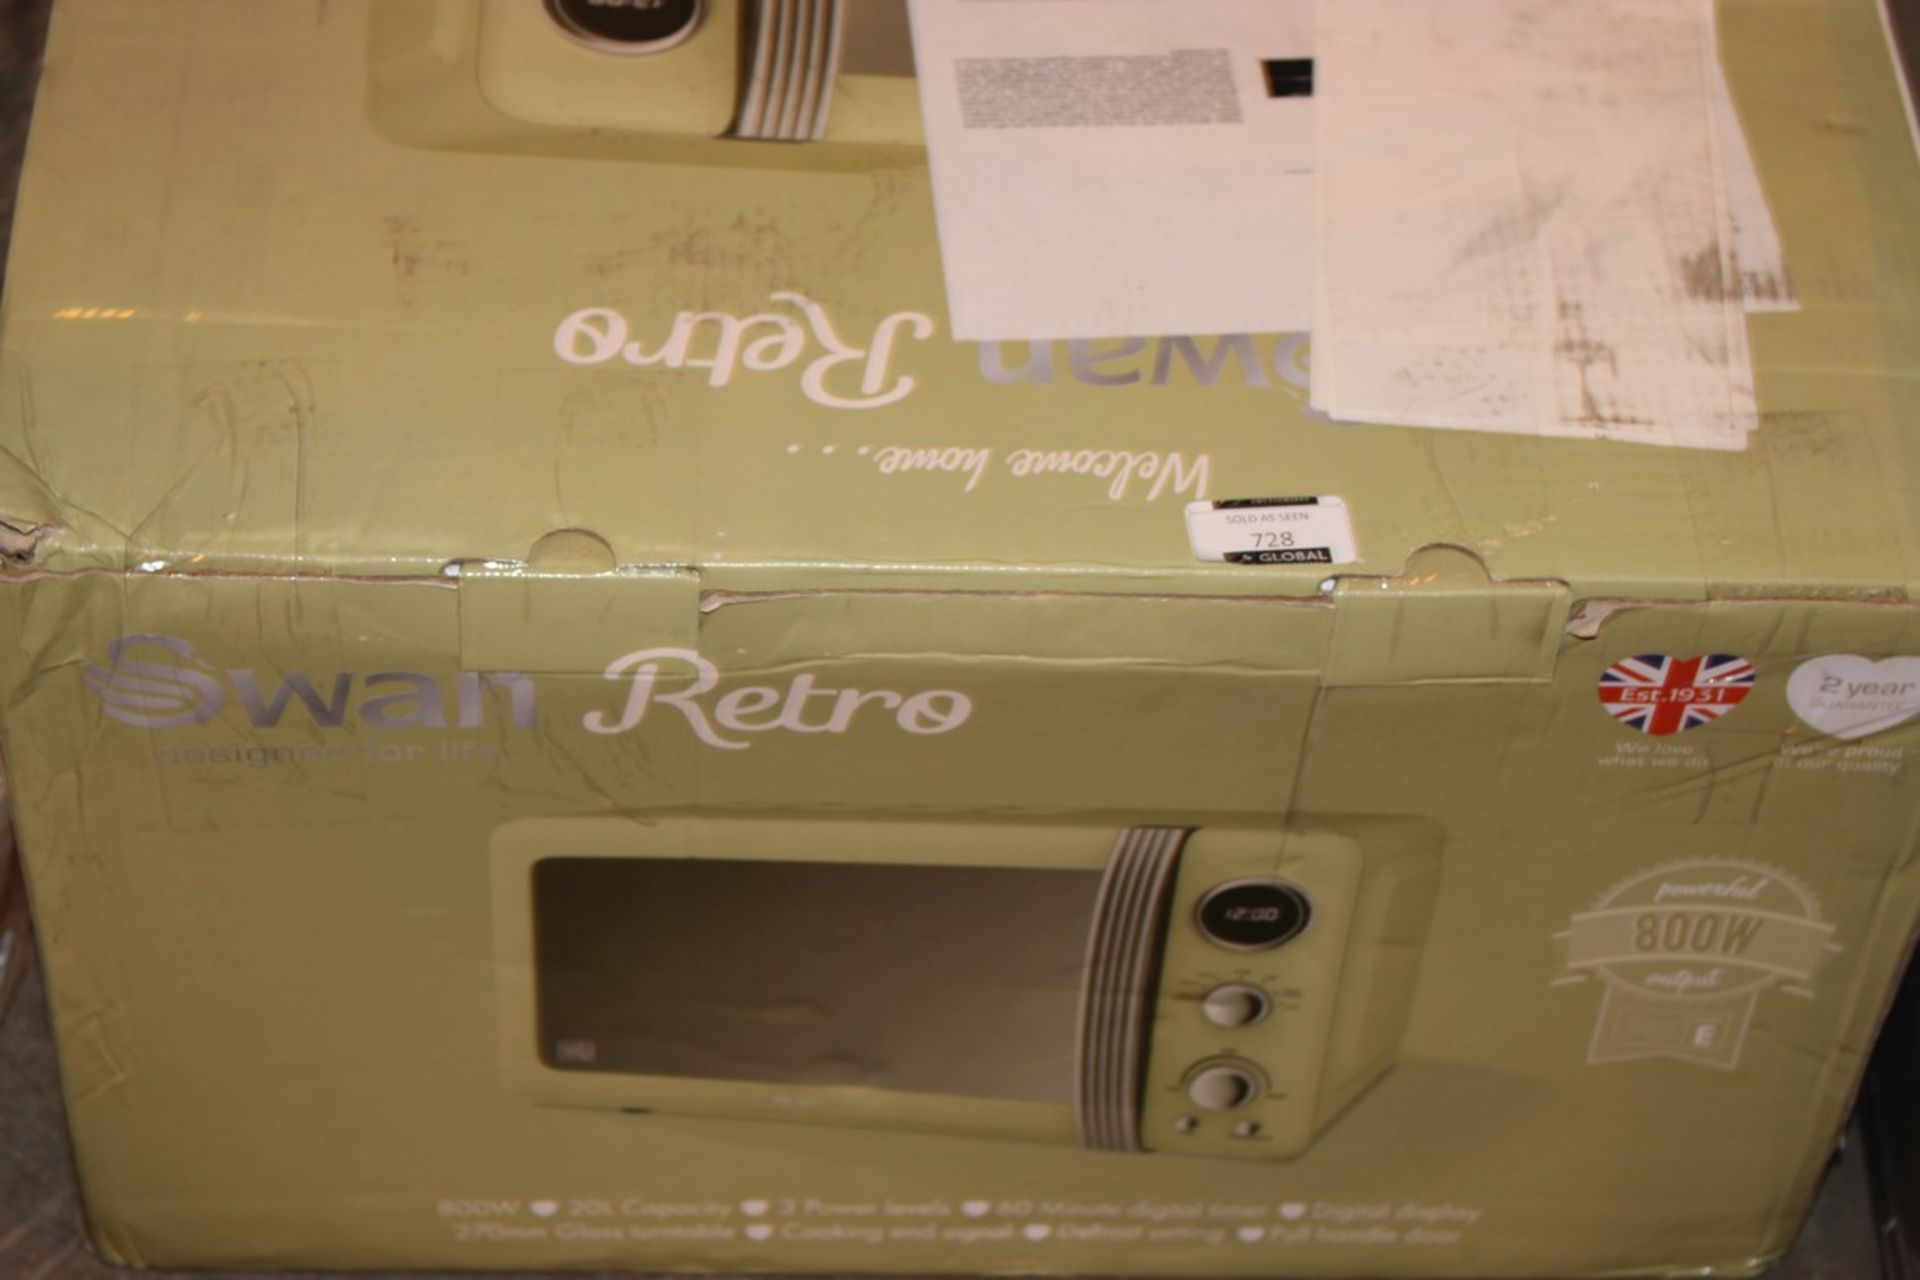 Boxed Swan Retro Sage Green Counter Top Microwave RRP £80 (Pictures Are For Illustration Puposes